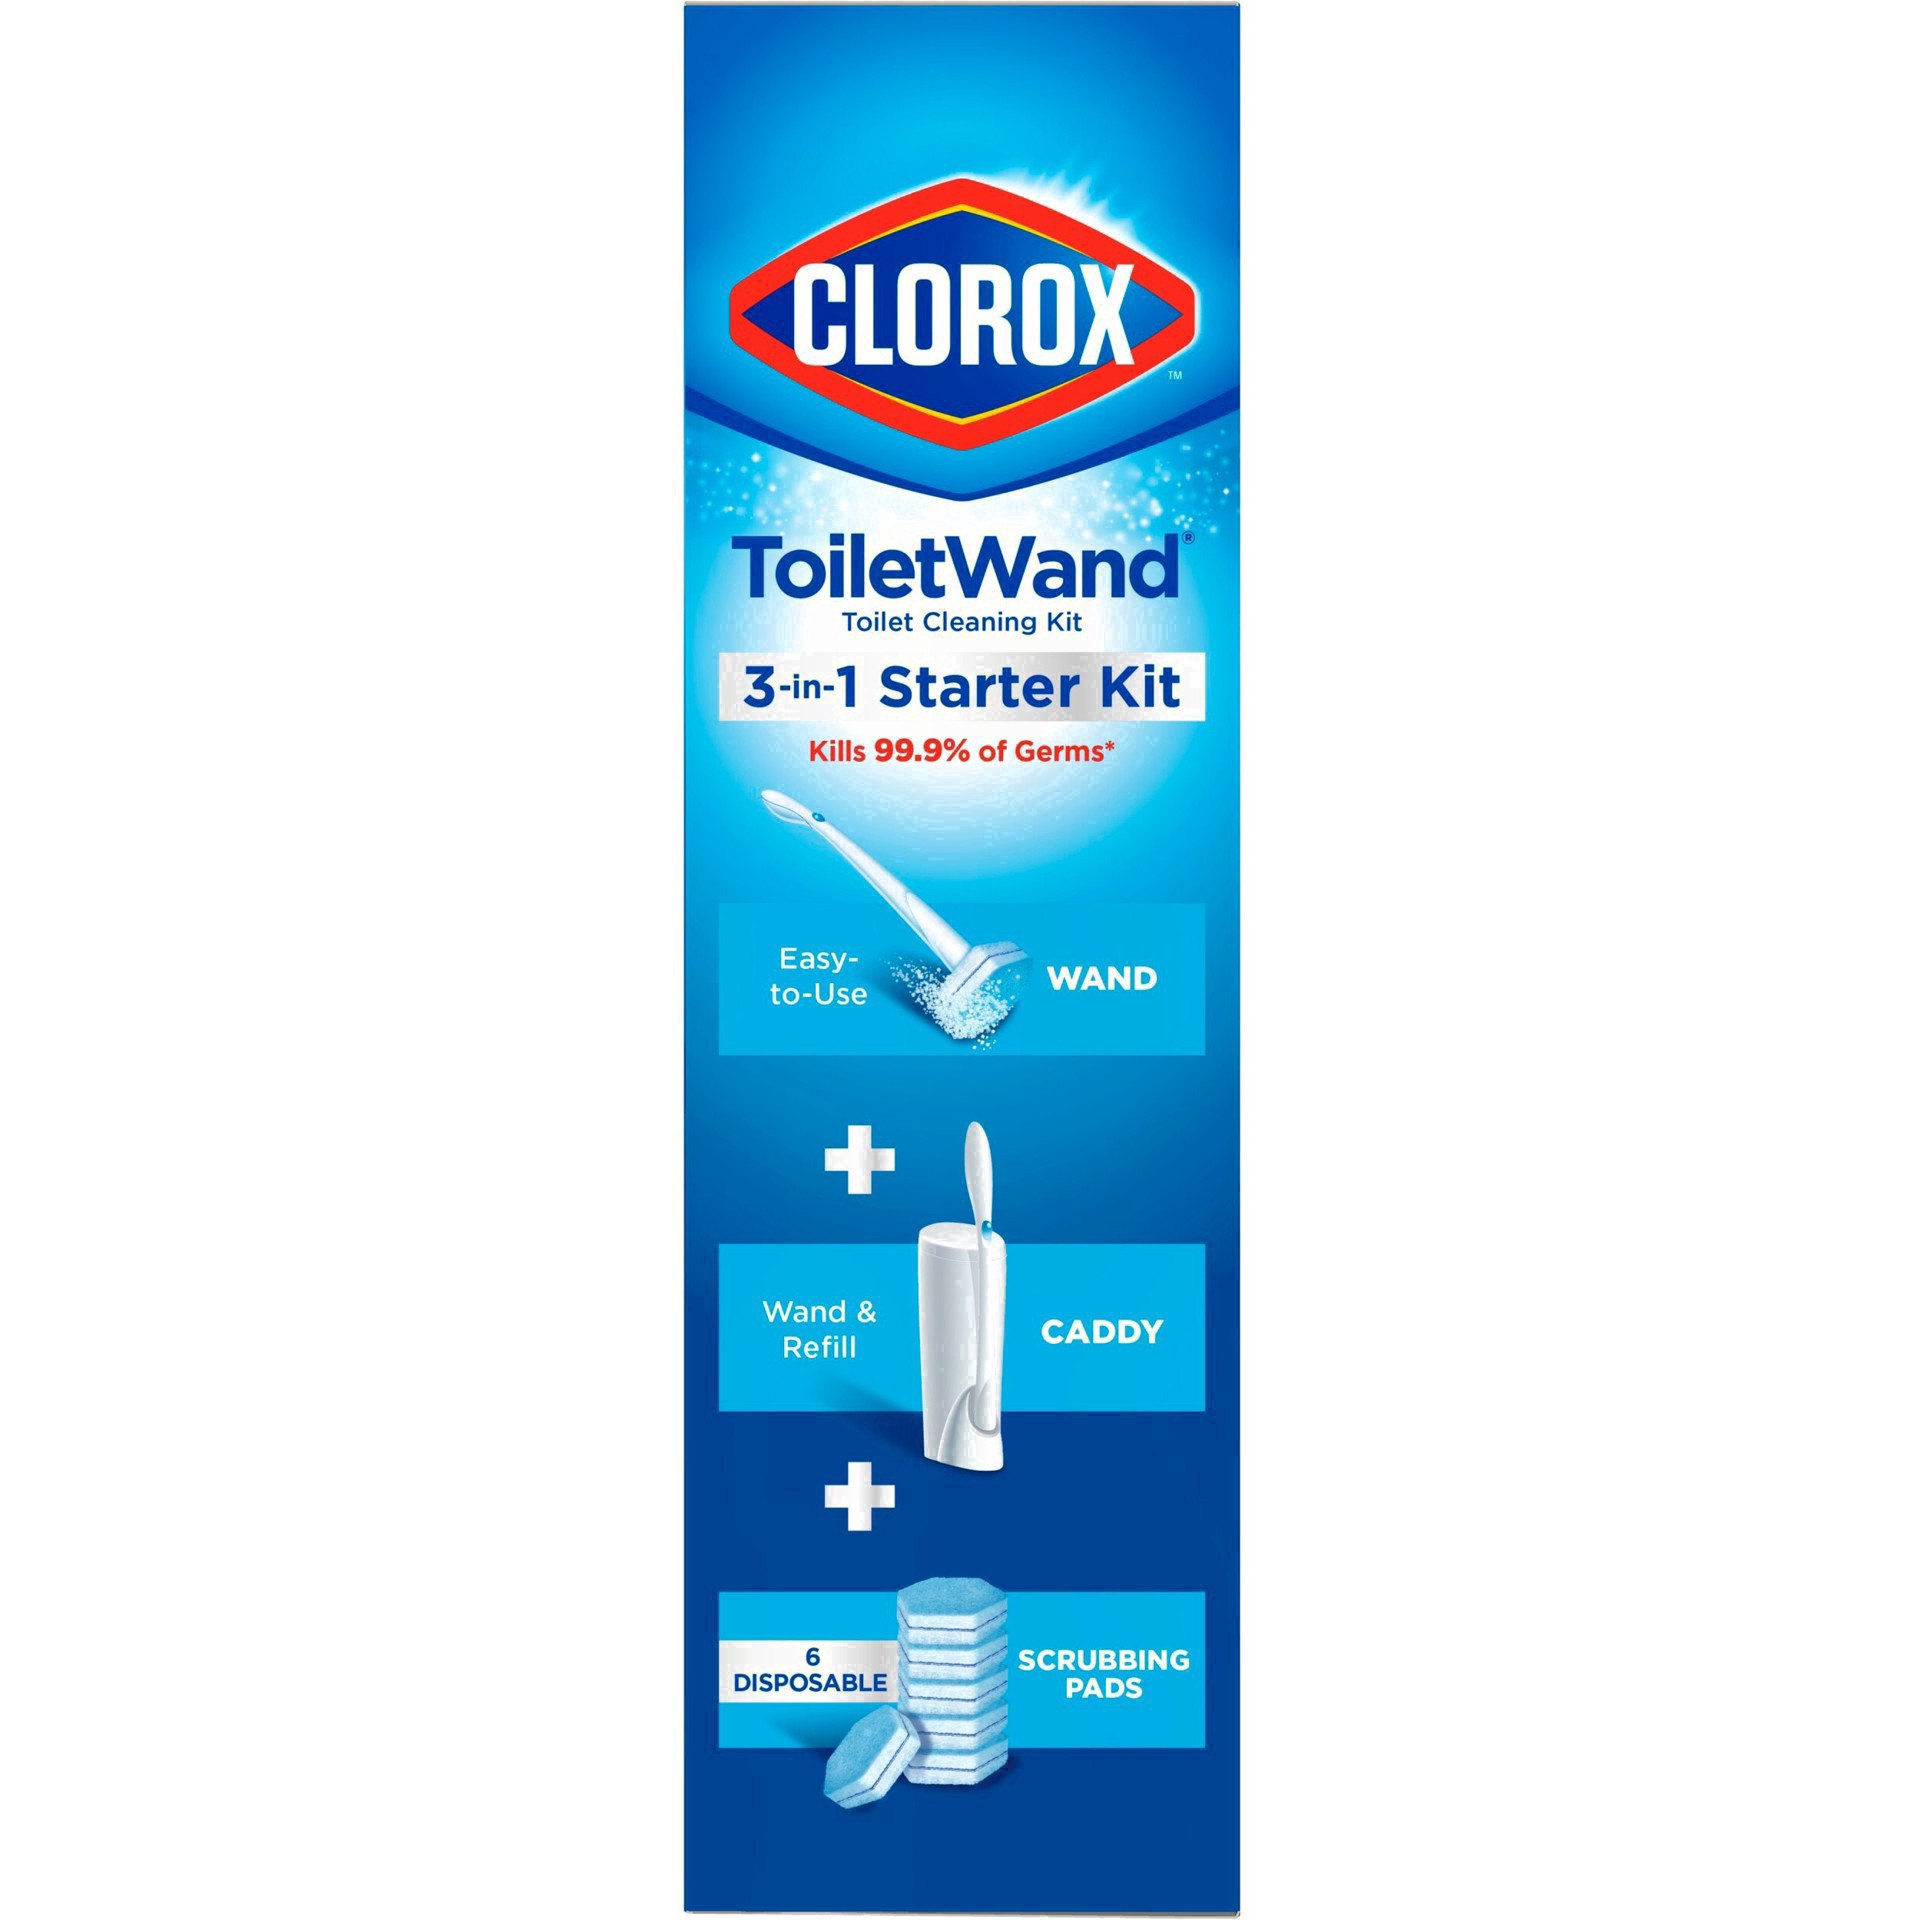 slide 127 of 176, Clorox Toilet Wand 3-in-1 Starter Toliet Cleaning Kit, 1 ct